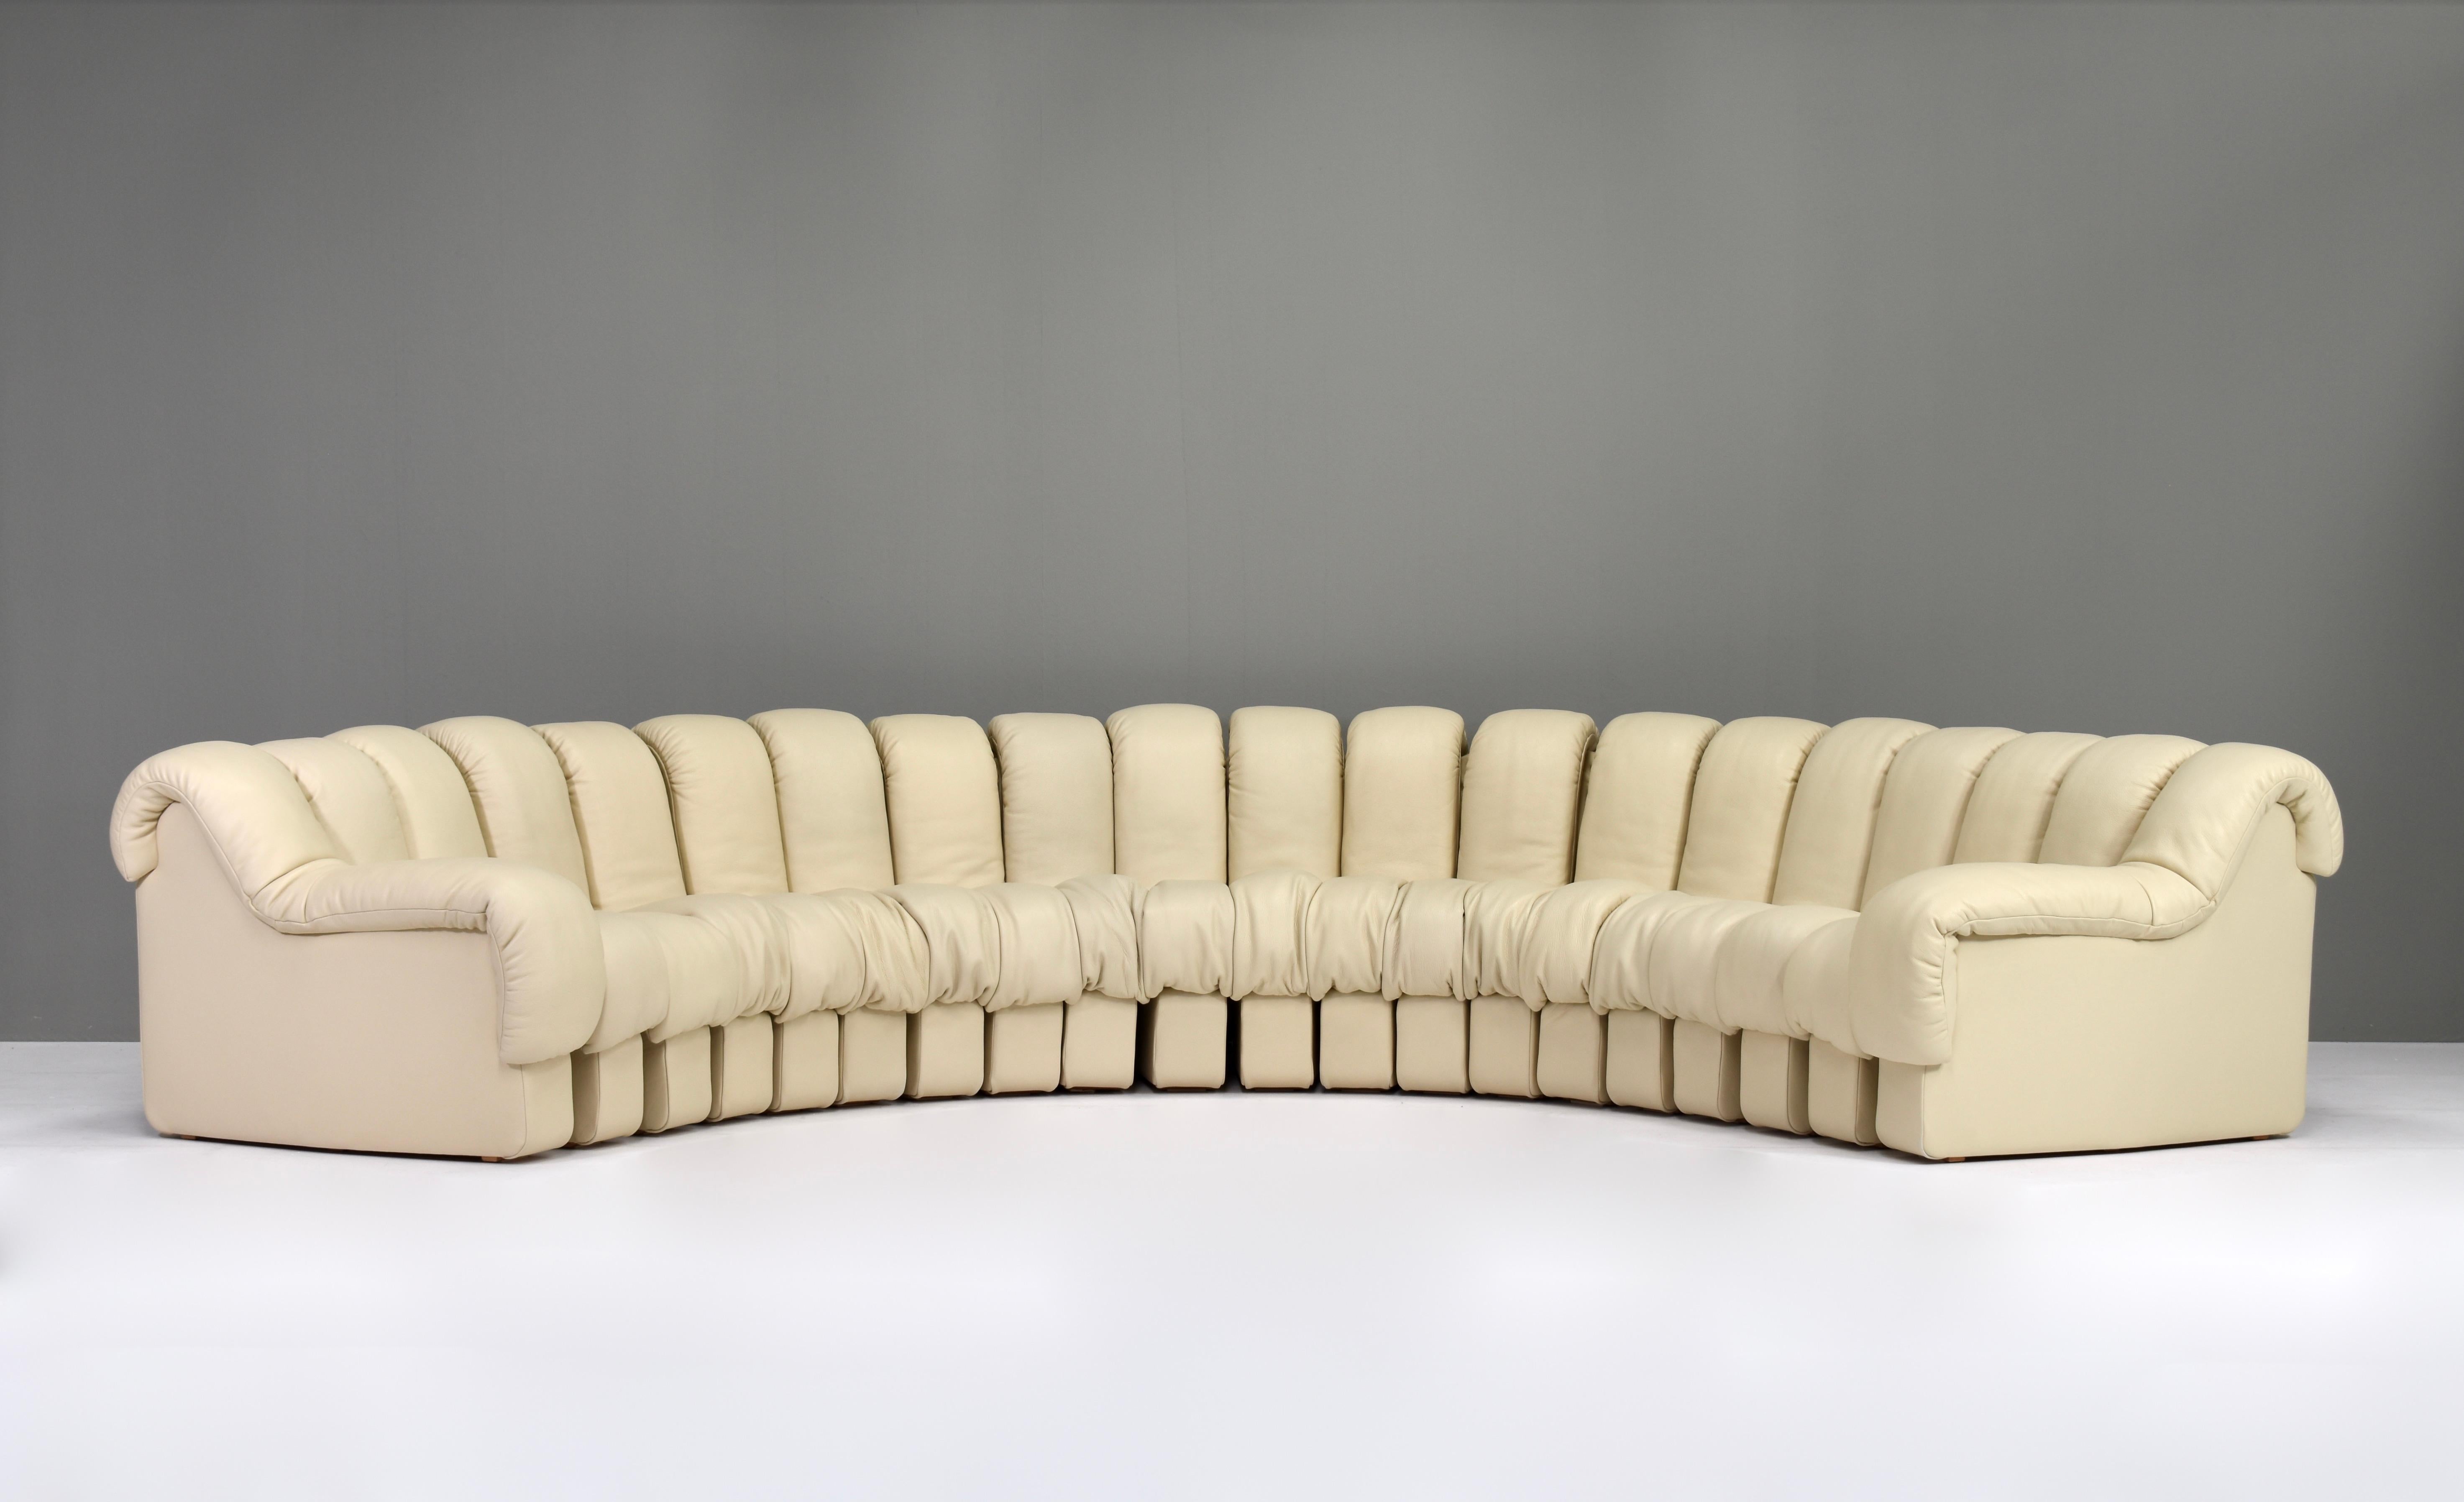 Swiss 26 Pieces Ds600 Sectional Sofa and Chairs by De Sede in Crème Leather